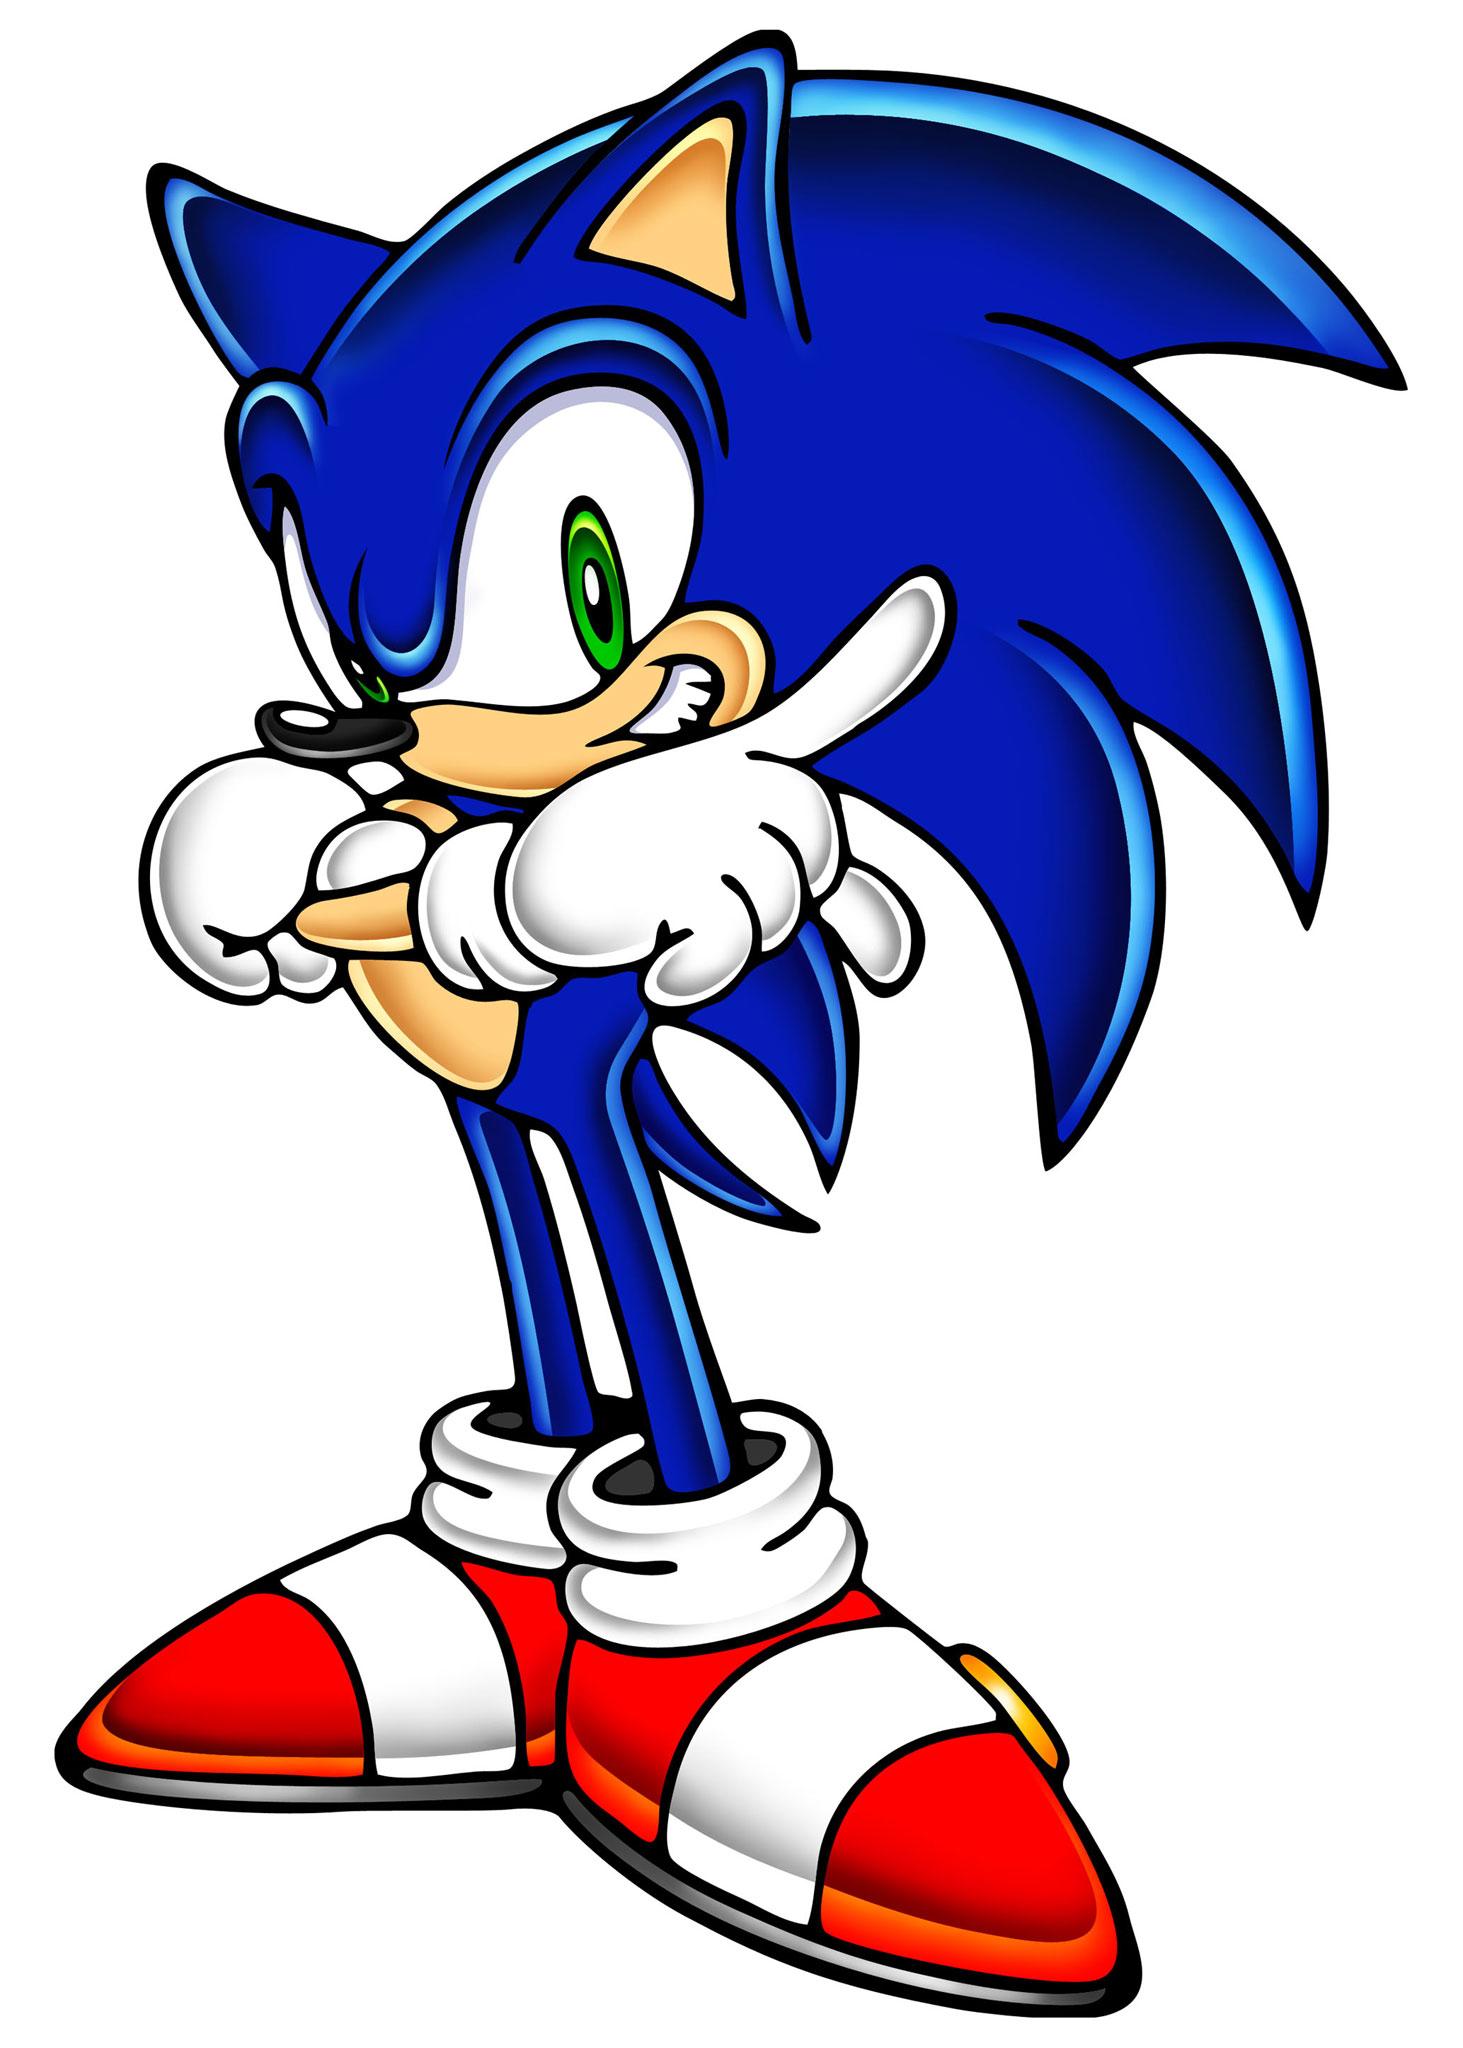 Sonic the Hedgehog: 'Practically introduced super-speed'